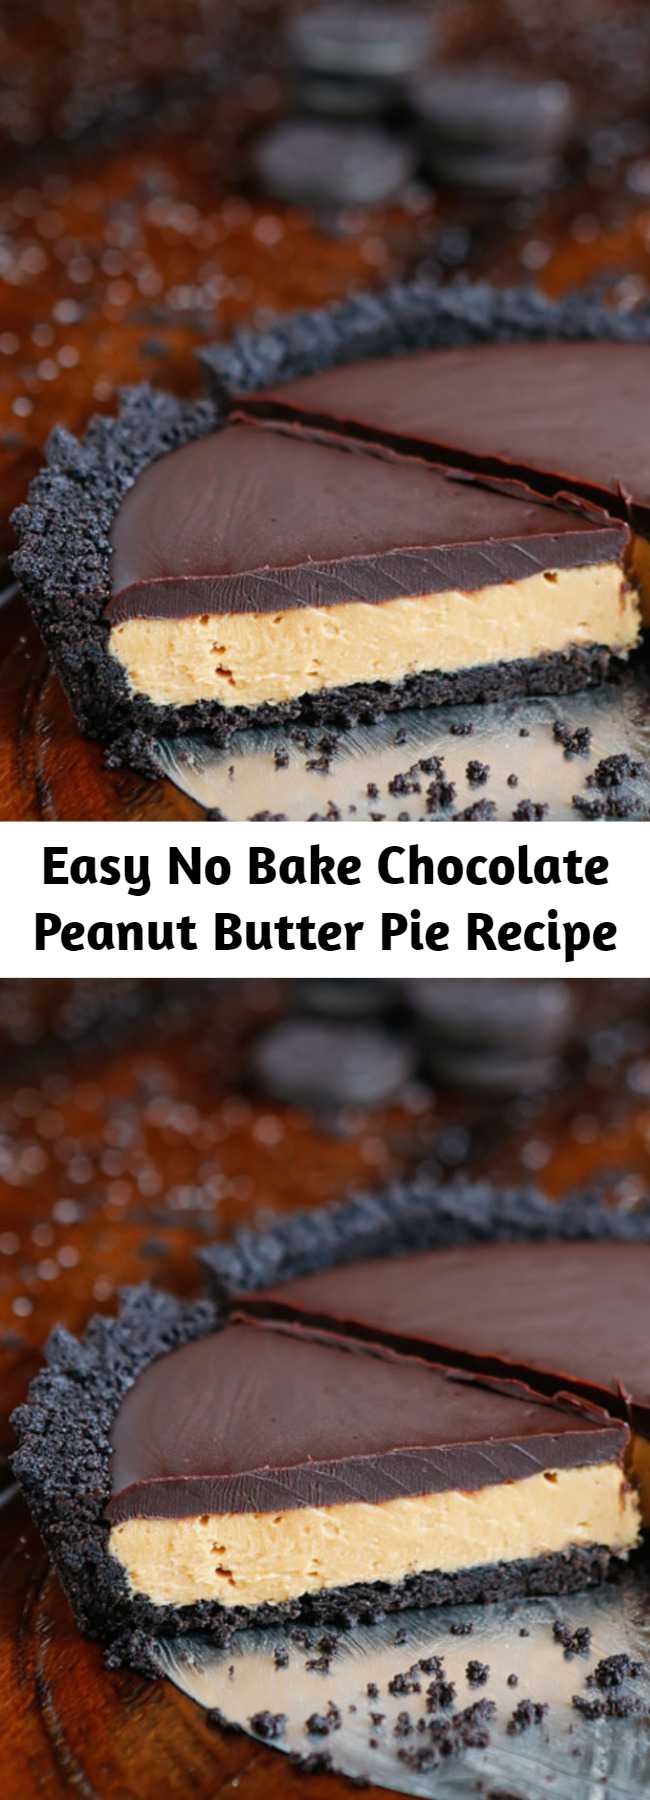 Easy No Bake Chocolate Peanut Butter Pie Recipe - This Peanut Butter Pie recipe is OUT of this world!! This is hands down one of the easiest, most impressive desserts I’ve ever made. There’s only six simple ingredients — it’s the best no bake peanut butter pie ever!